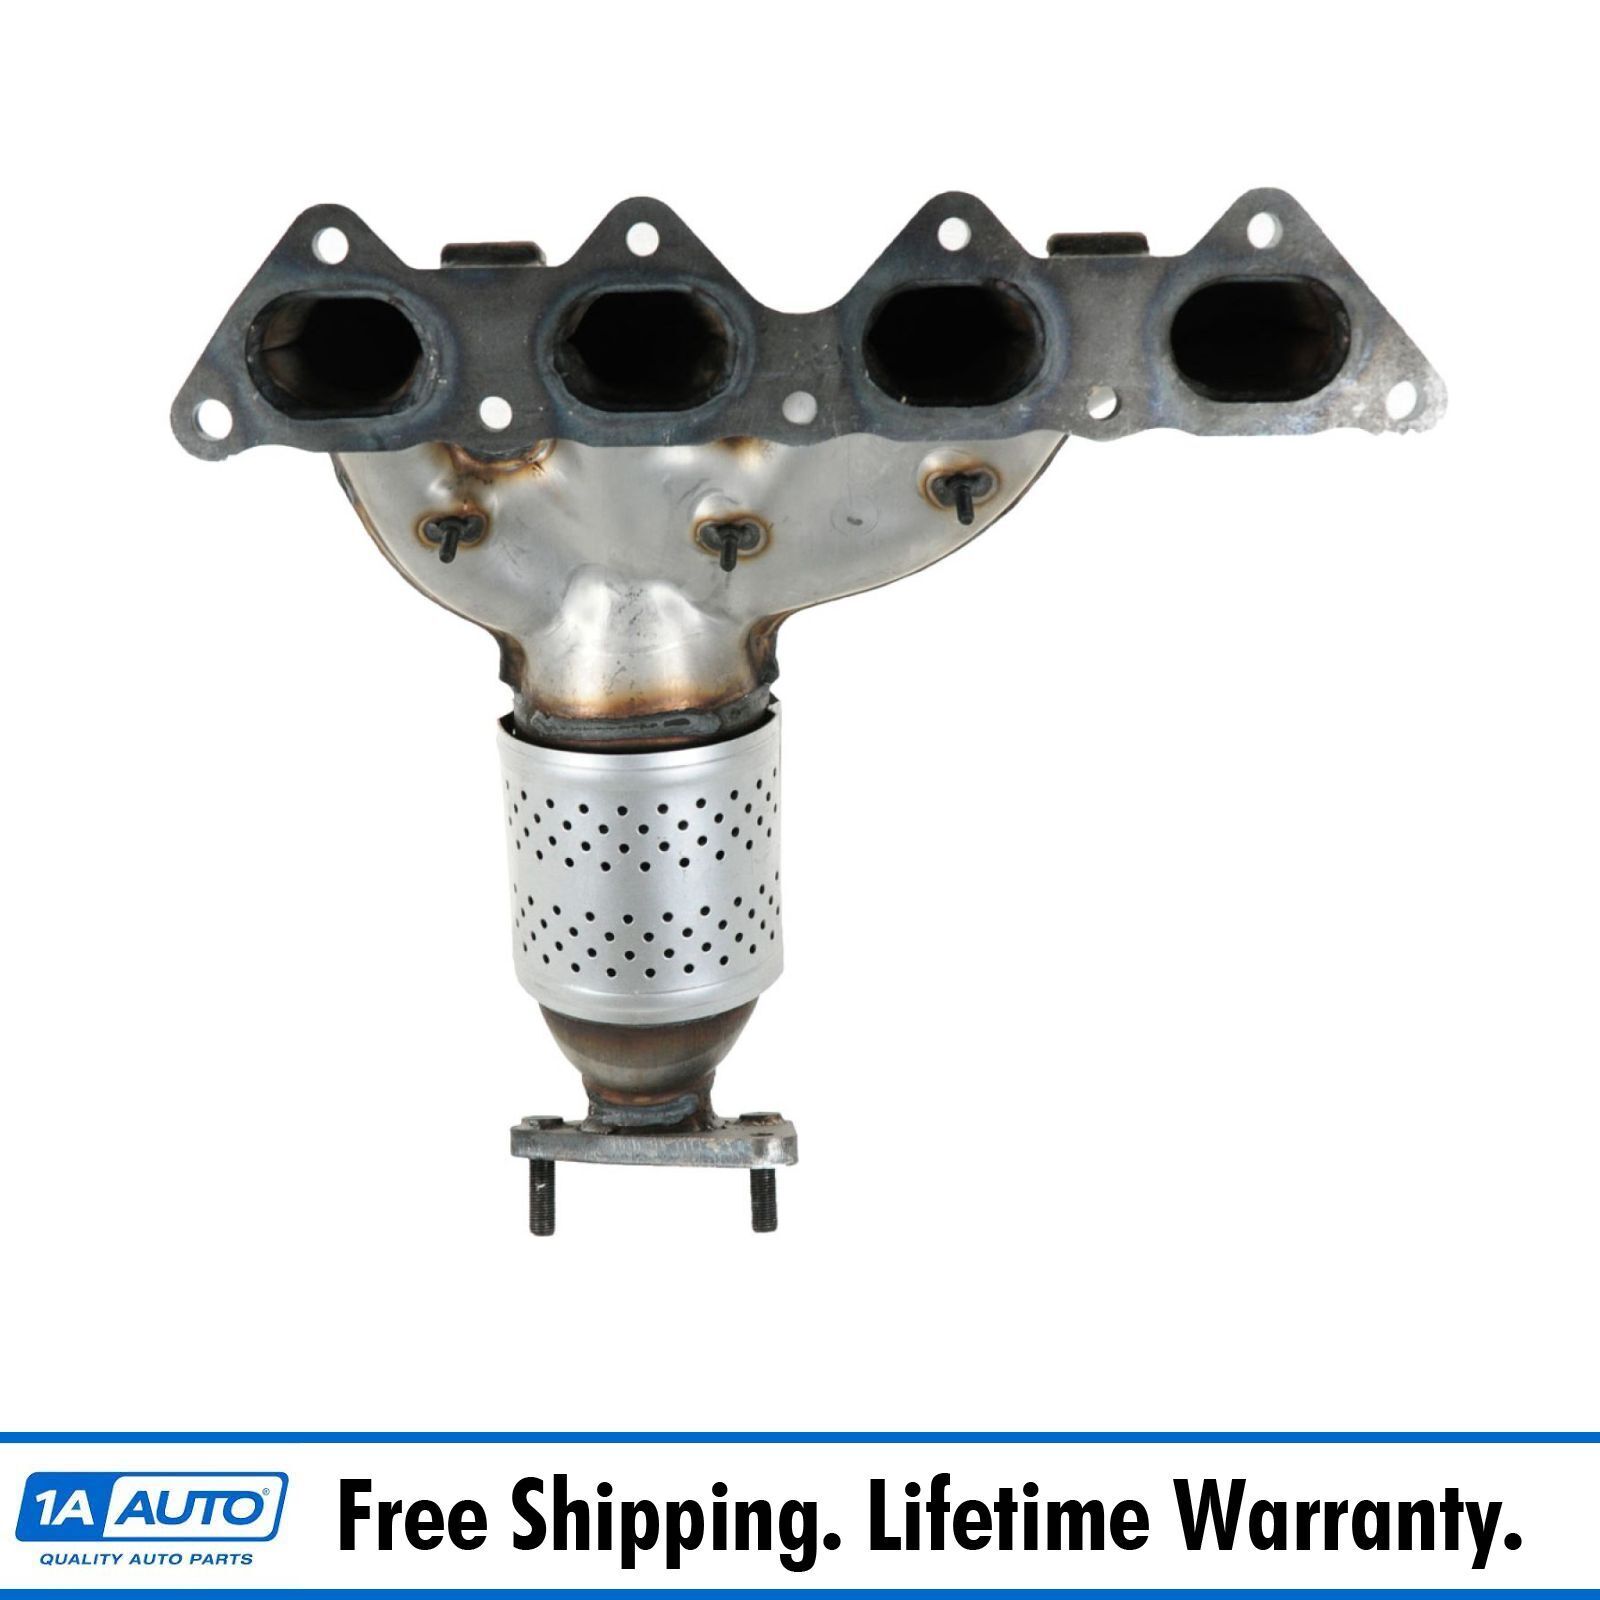 Exhaust Manifold Catalytic Converter for Eclipse Stratus Galant Sebring 2.4L